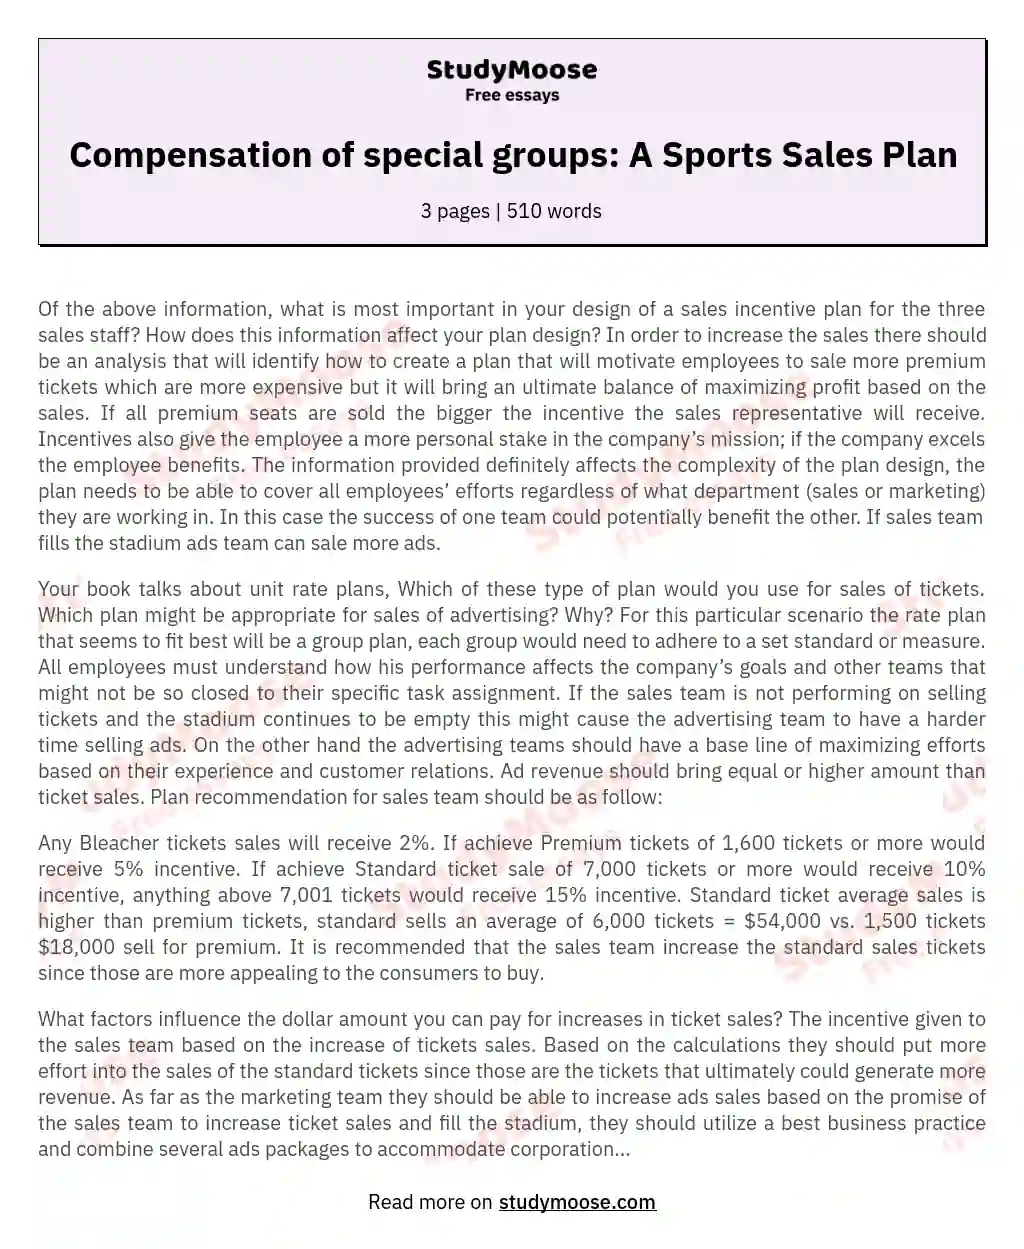 Compensation of special groups: A Sports Sales Plan essay